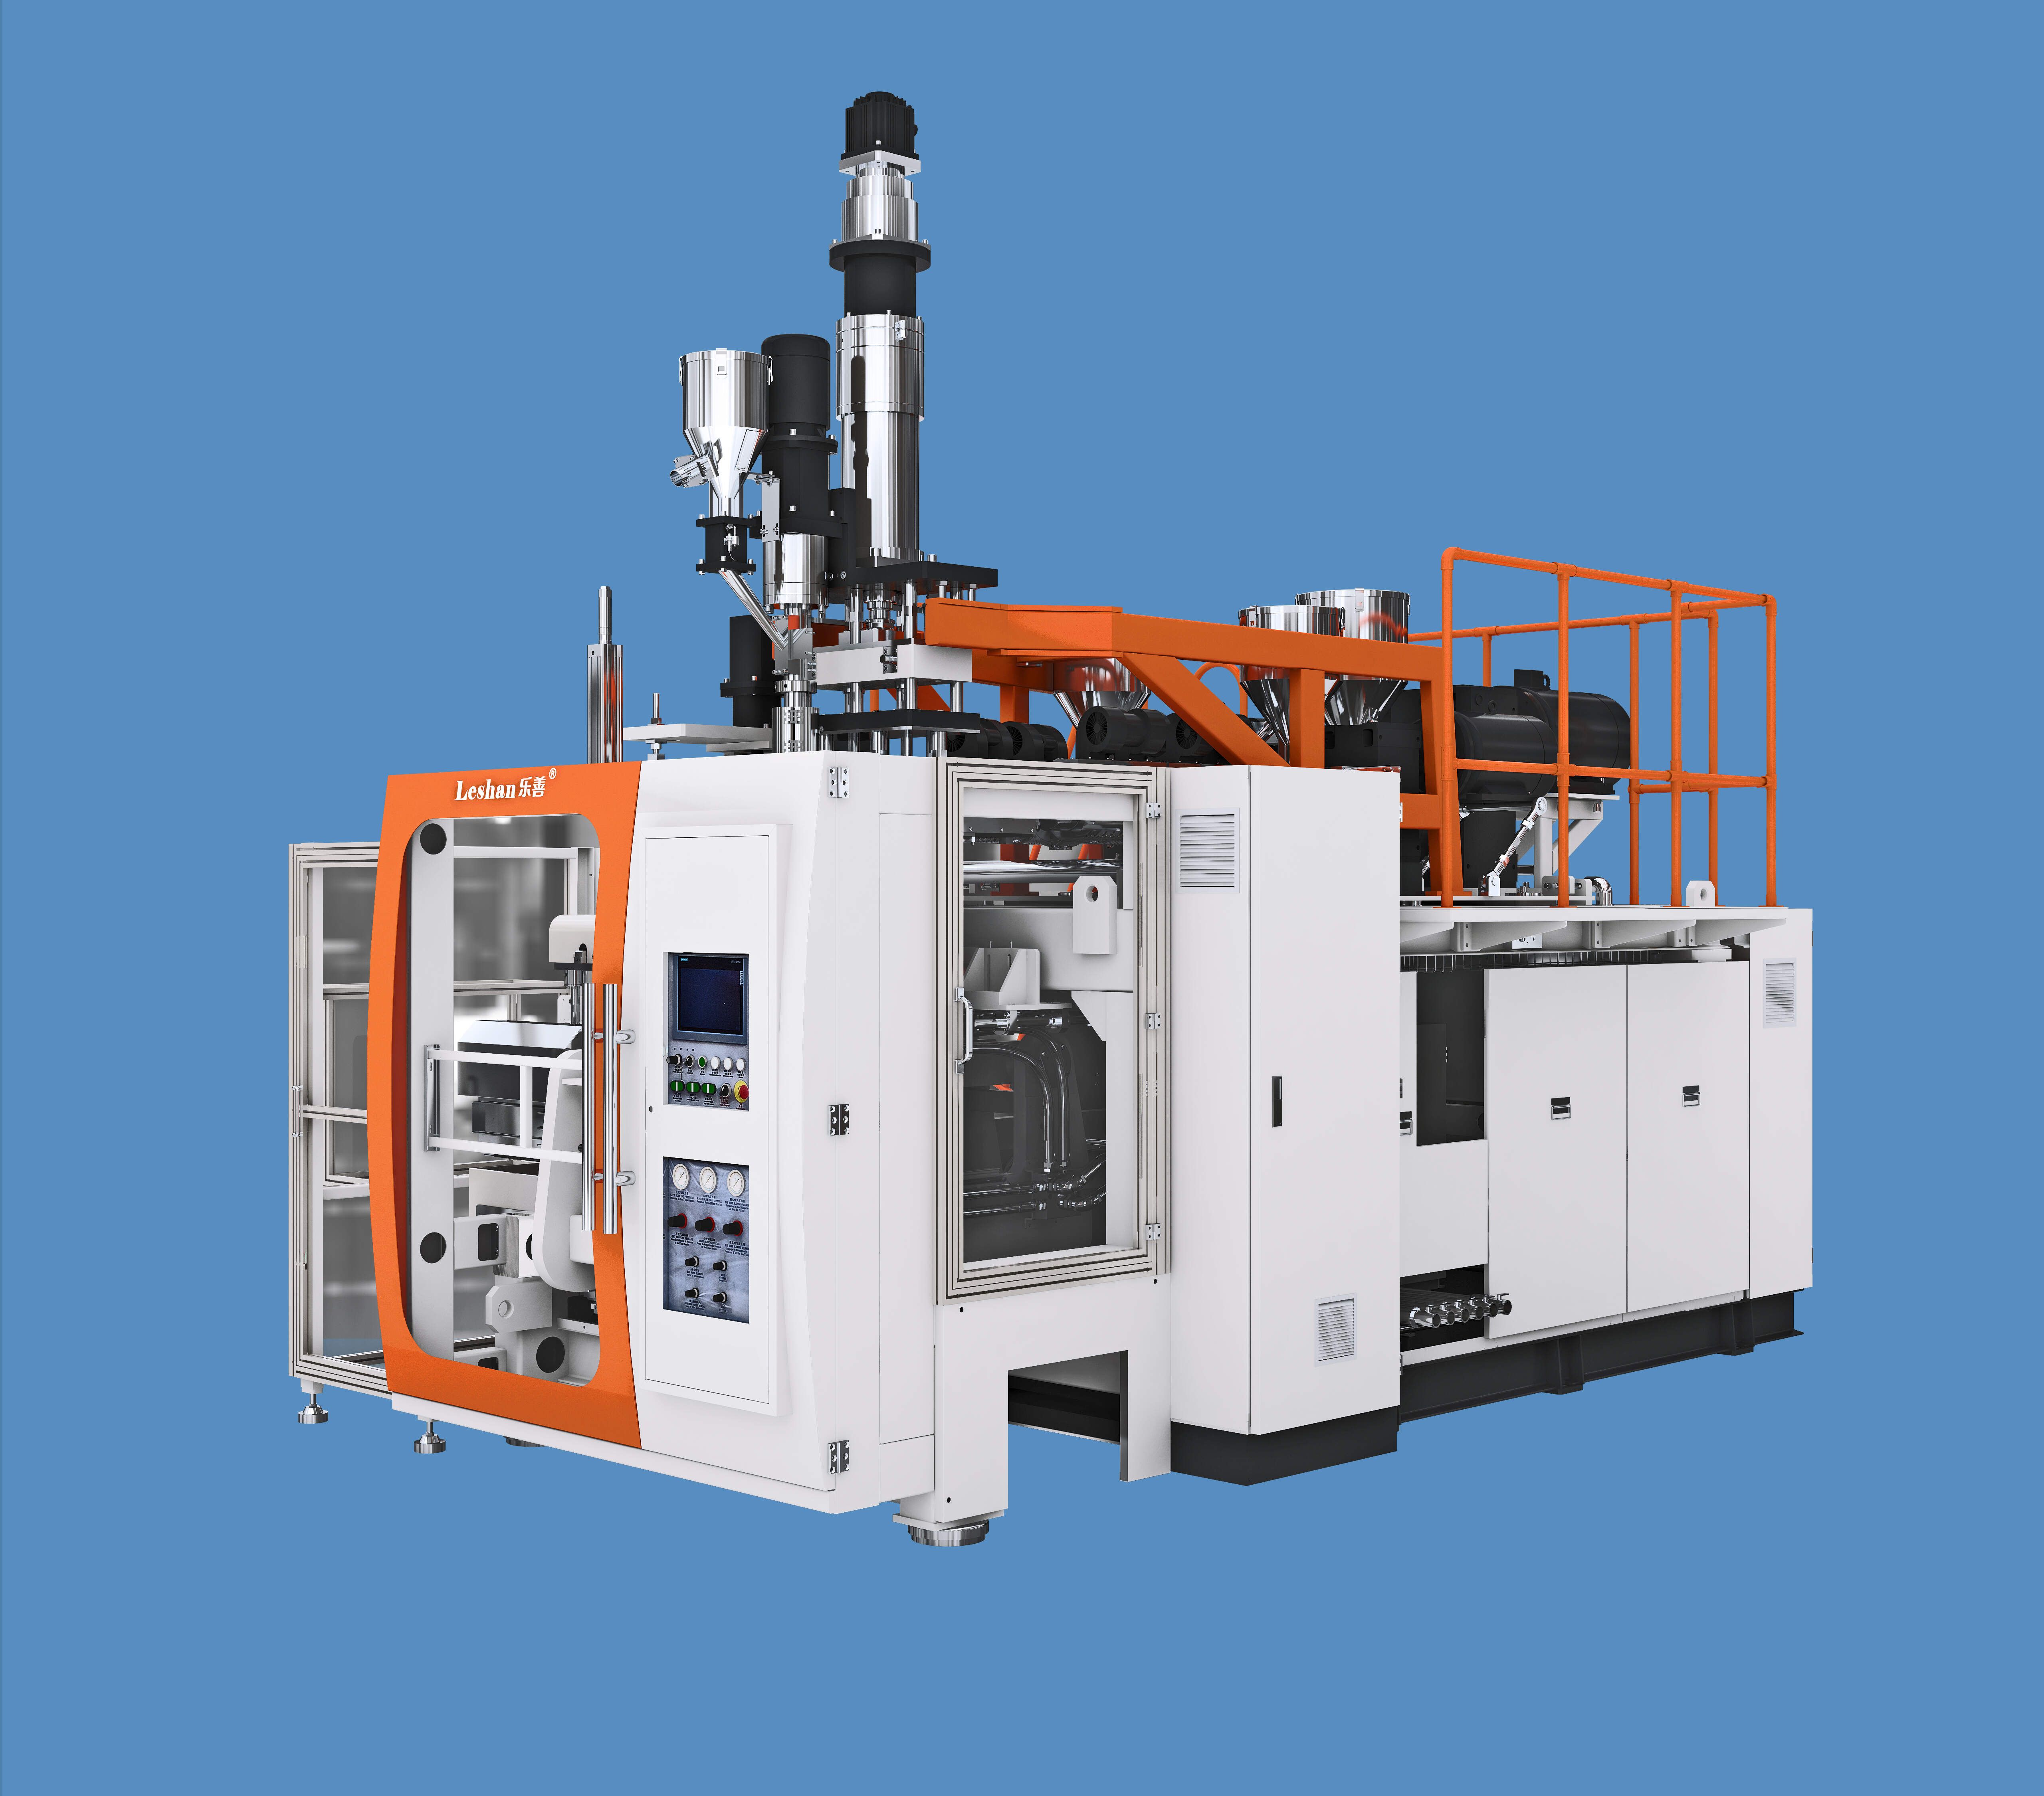 How long is the production cycle of Leshan blow molding machine? What is the lead time?